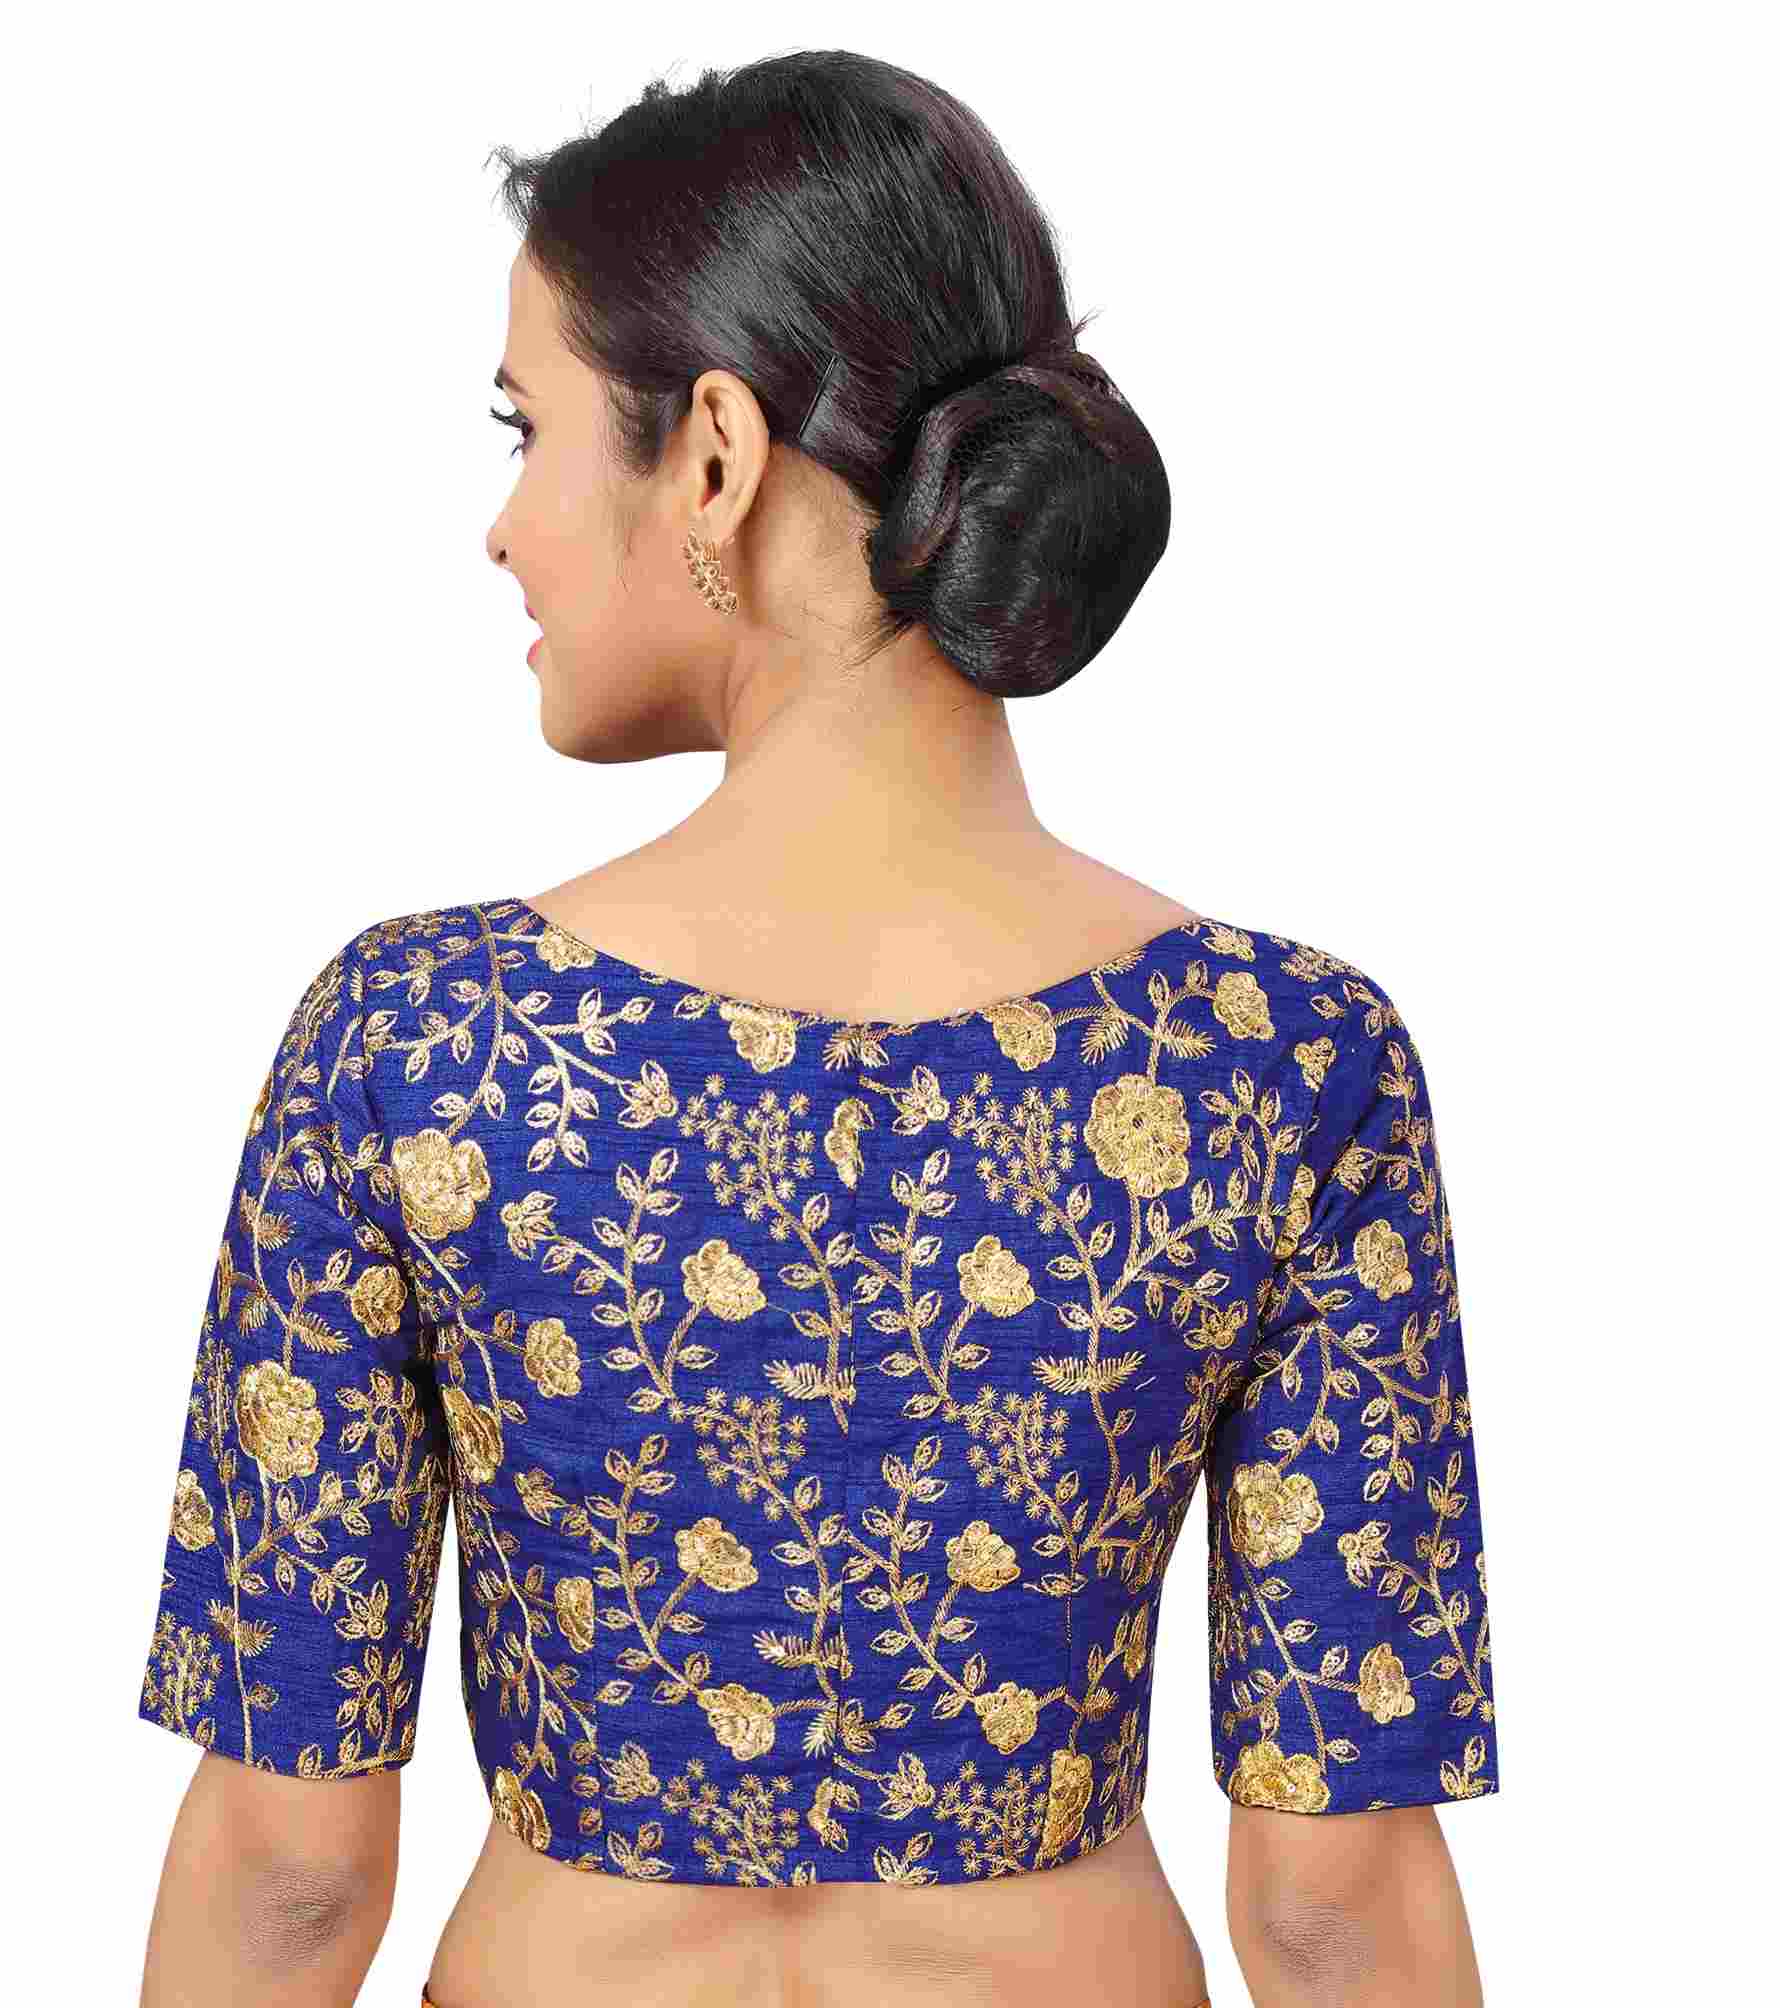 Women's Royal Blue Embroidered Blouse by Shringaar- (1pc set)